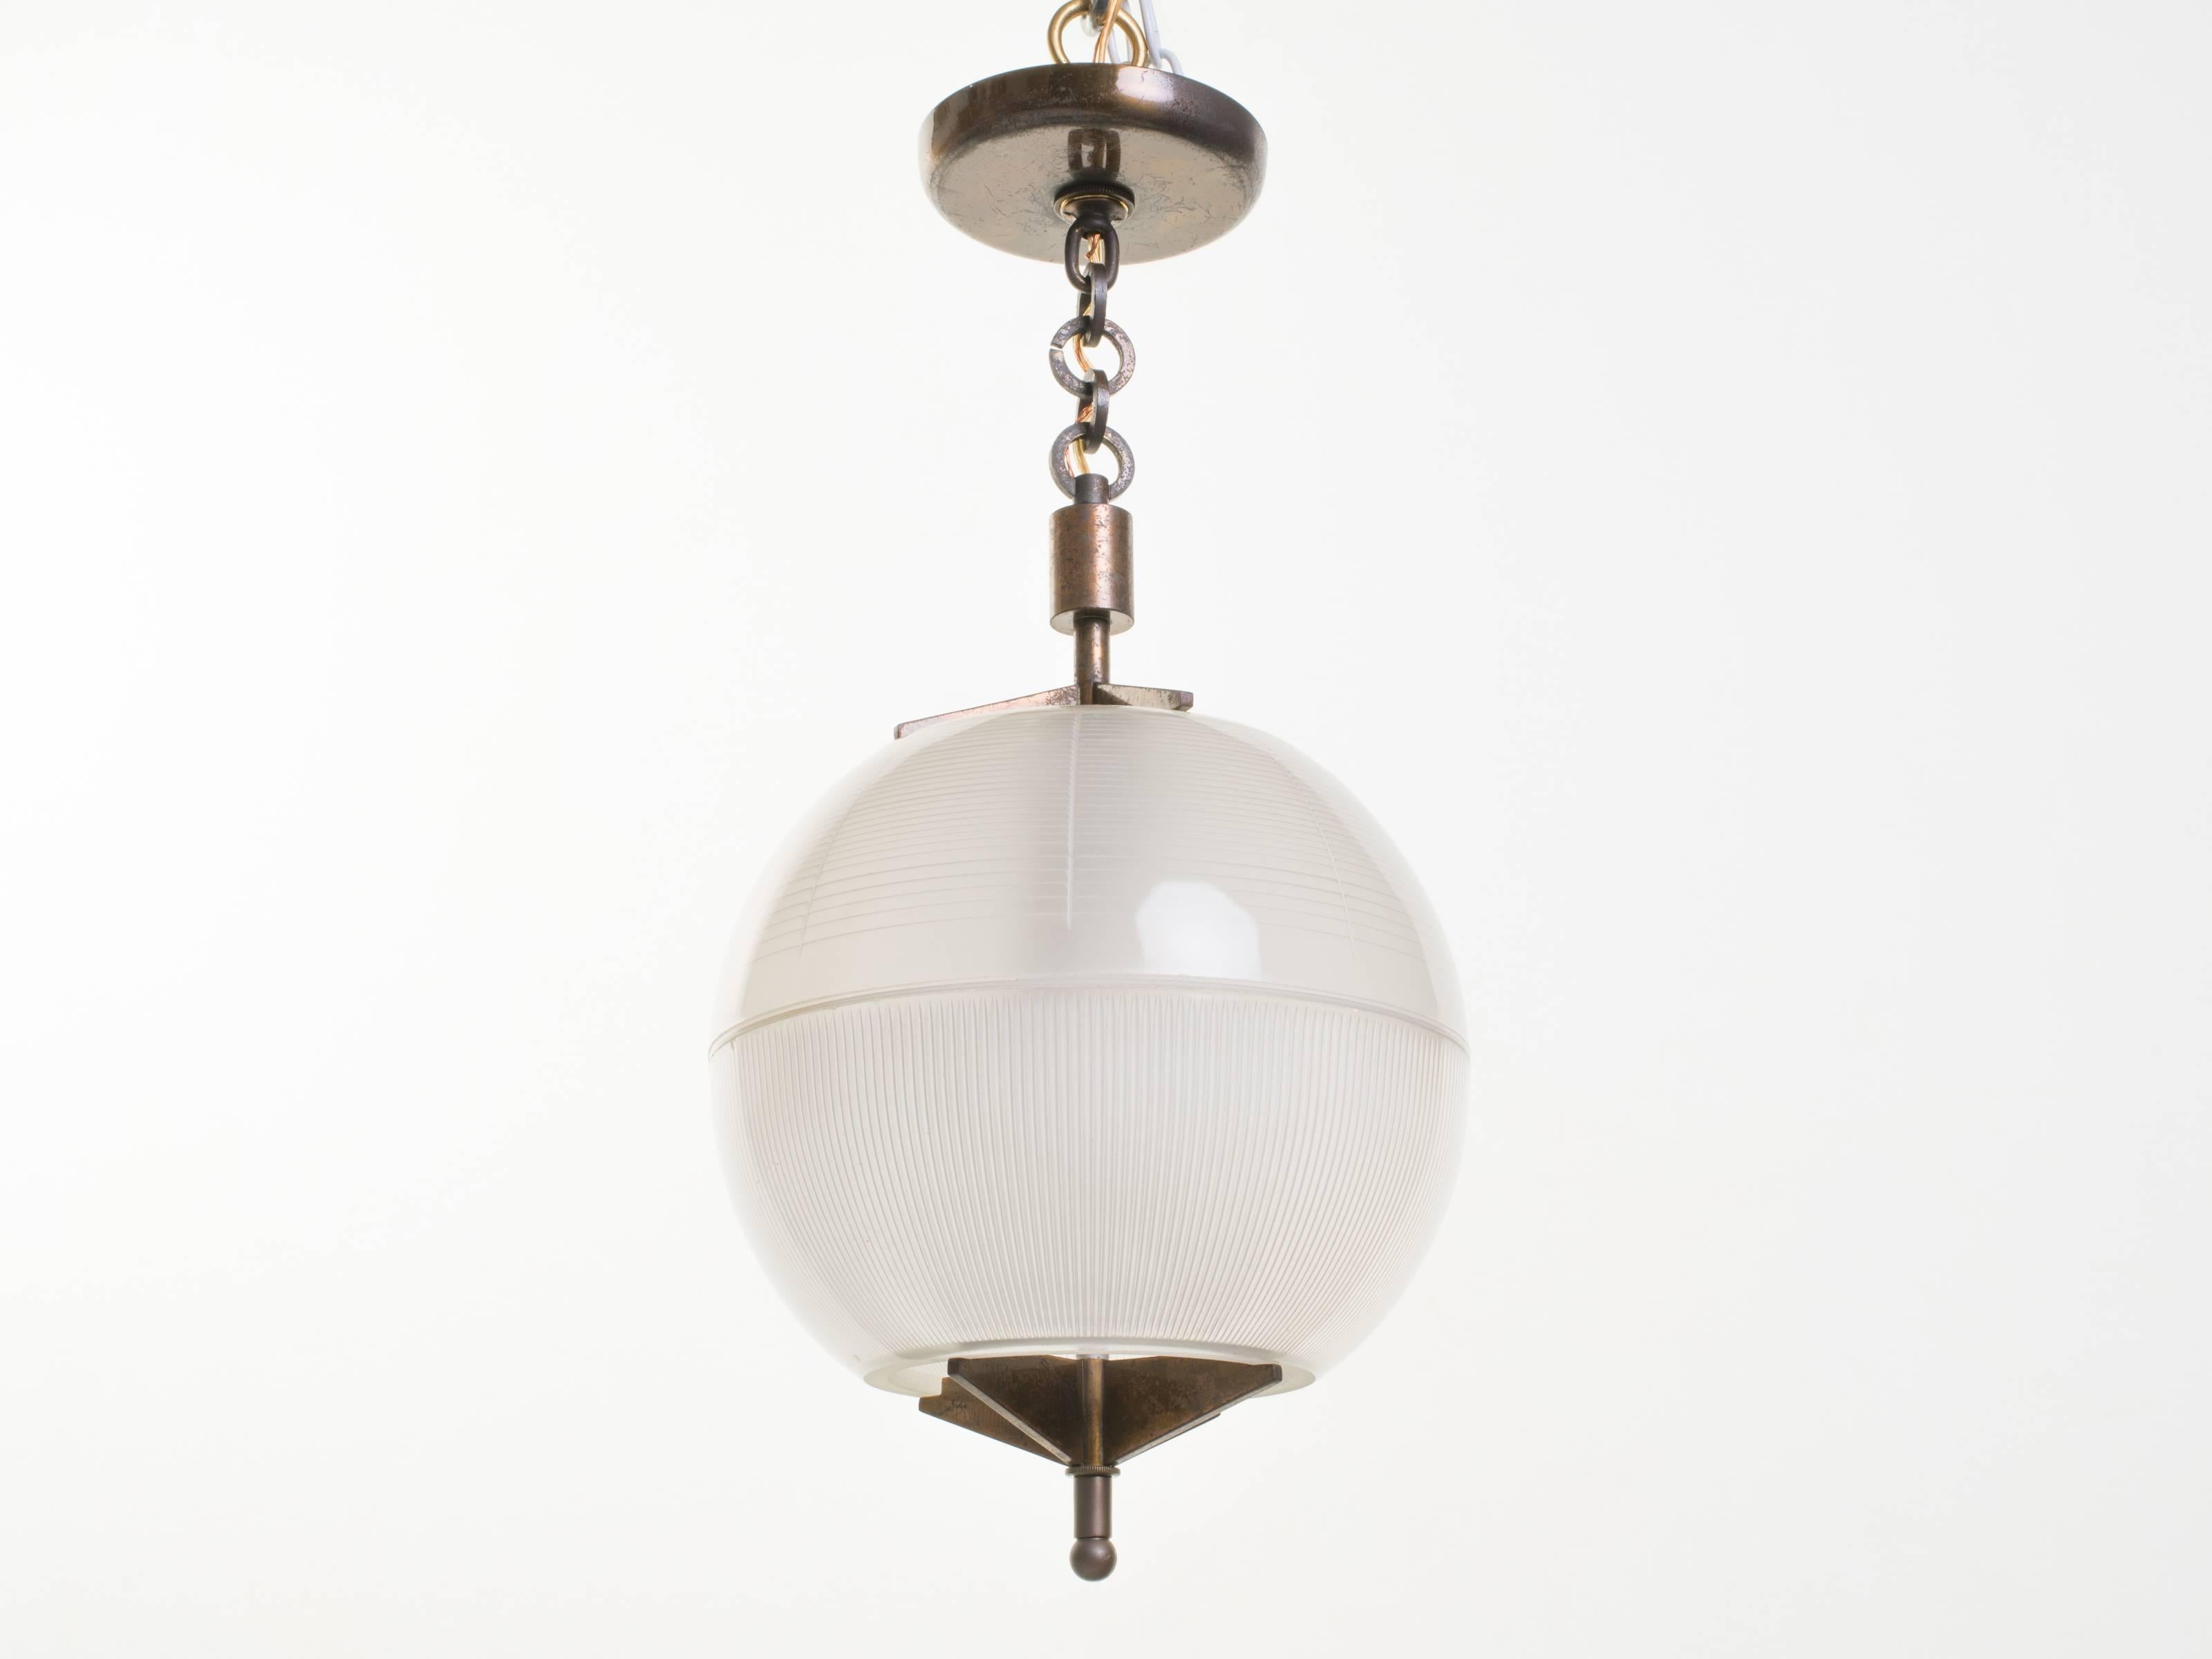 Vintage pendant light with a clear glass sphere and a X-shaped patinated brass base.